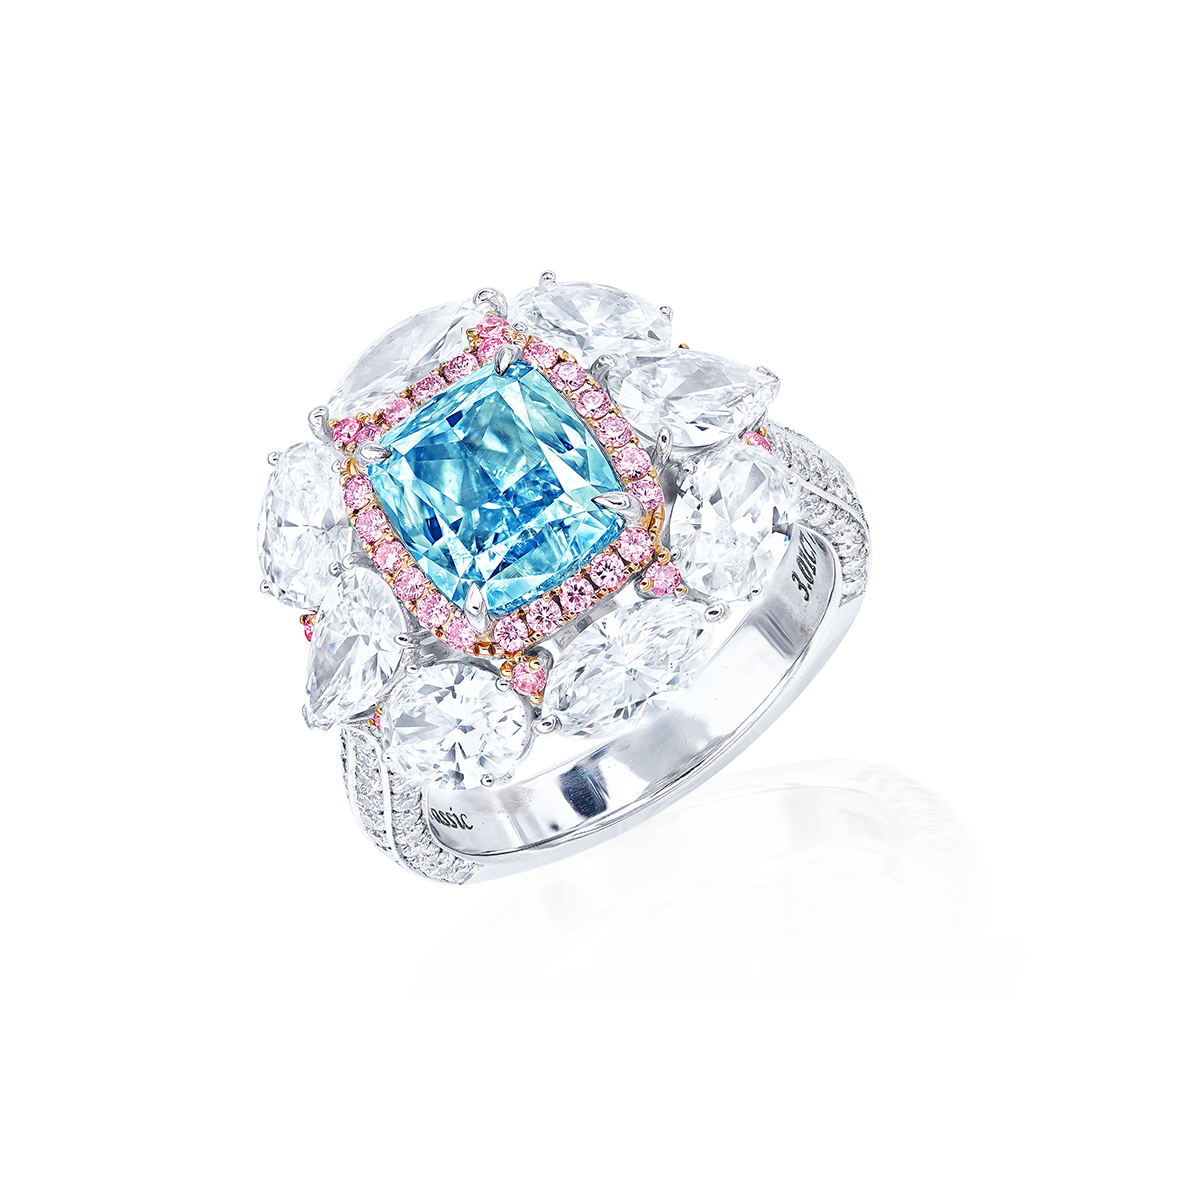 GIA 3.01克拉 綠藍鑽鑽戒
An Exceptional Fancy Green-Blue 
Colored Diamond and Diamond Ring